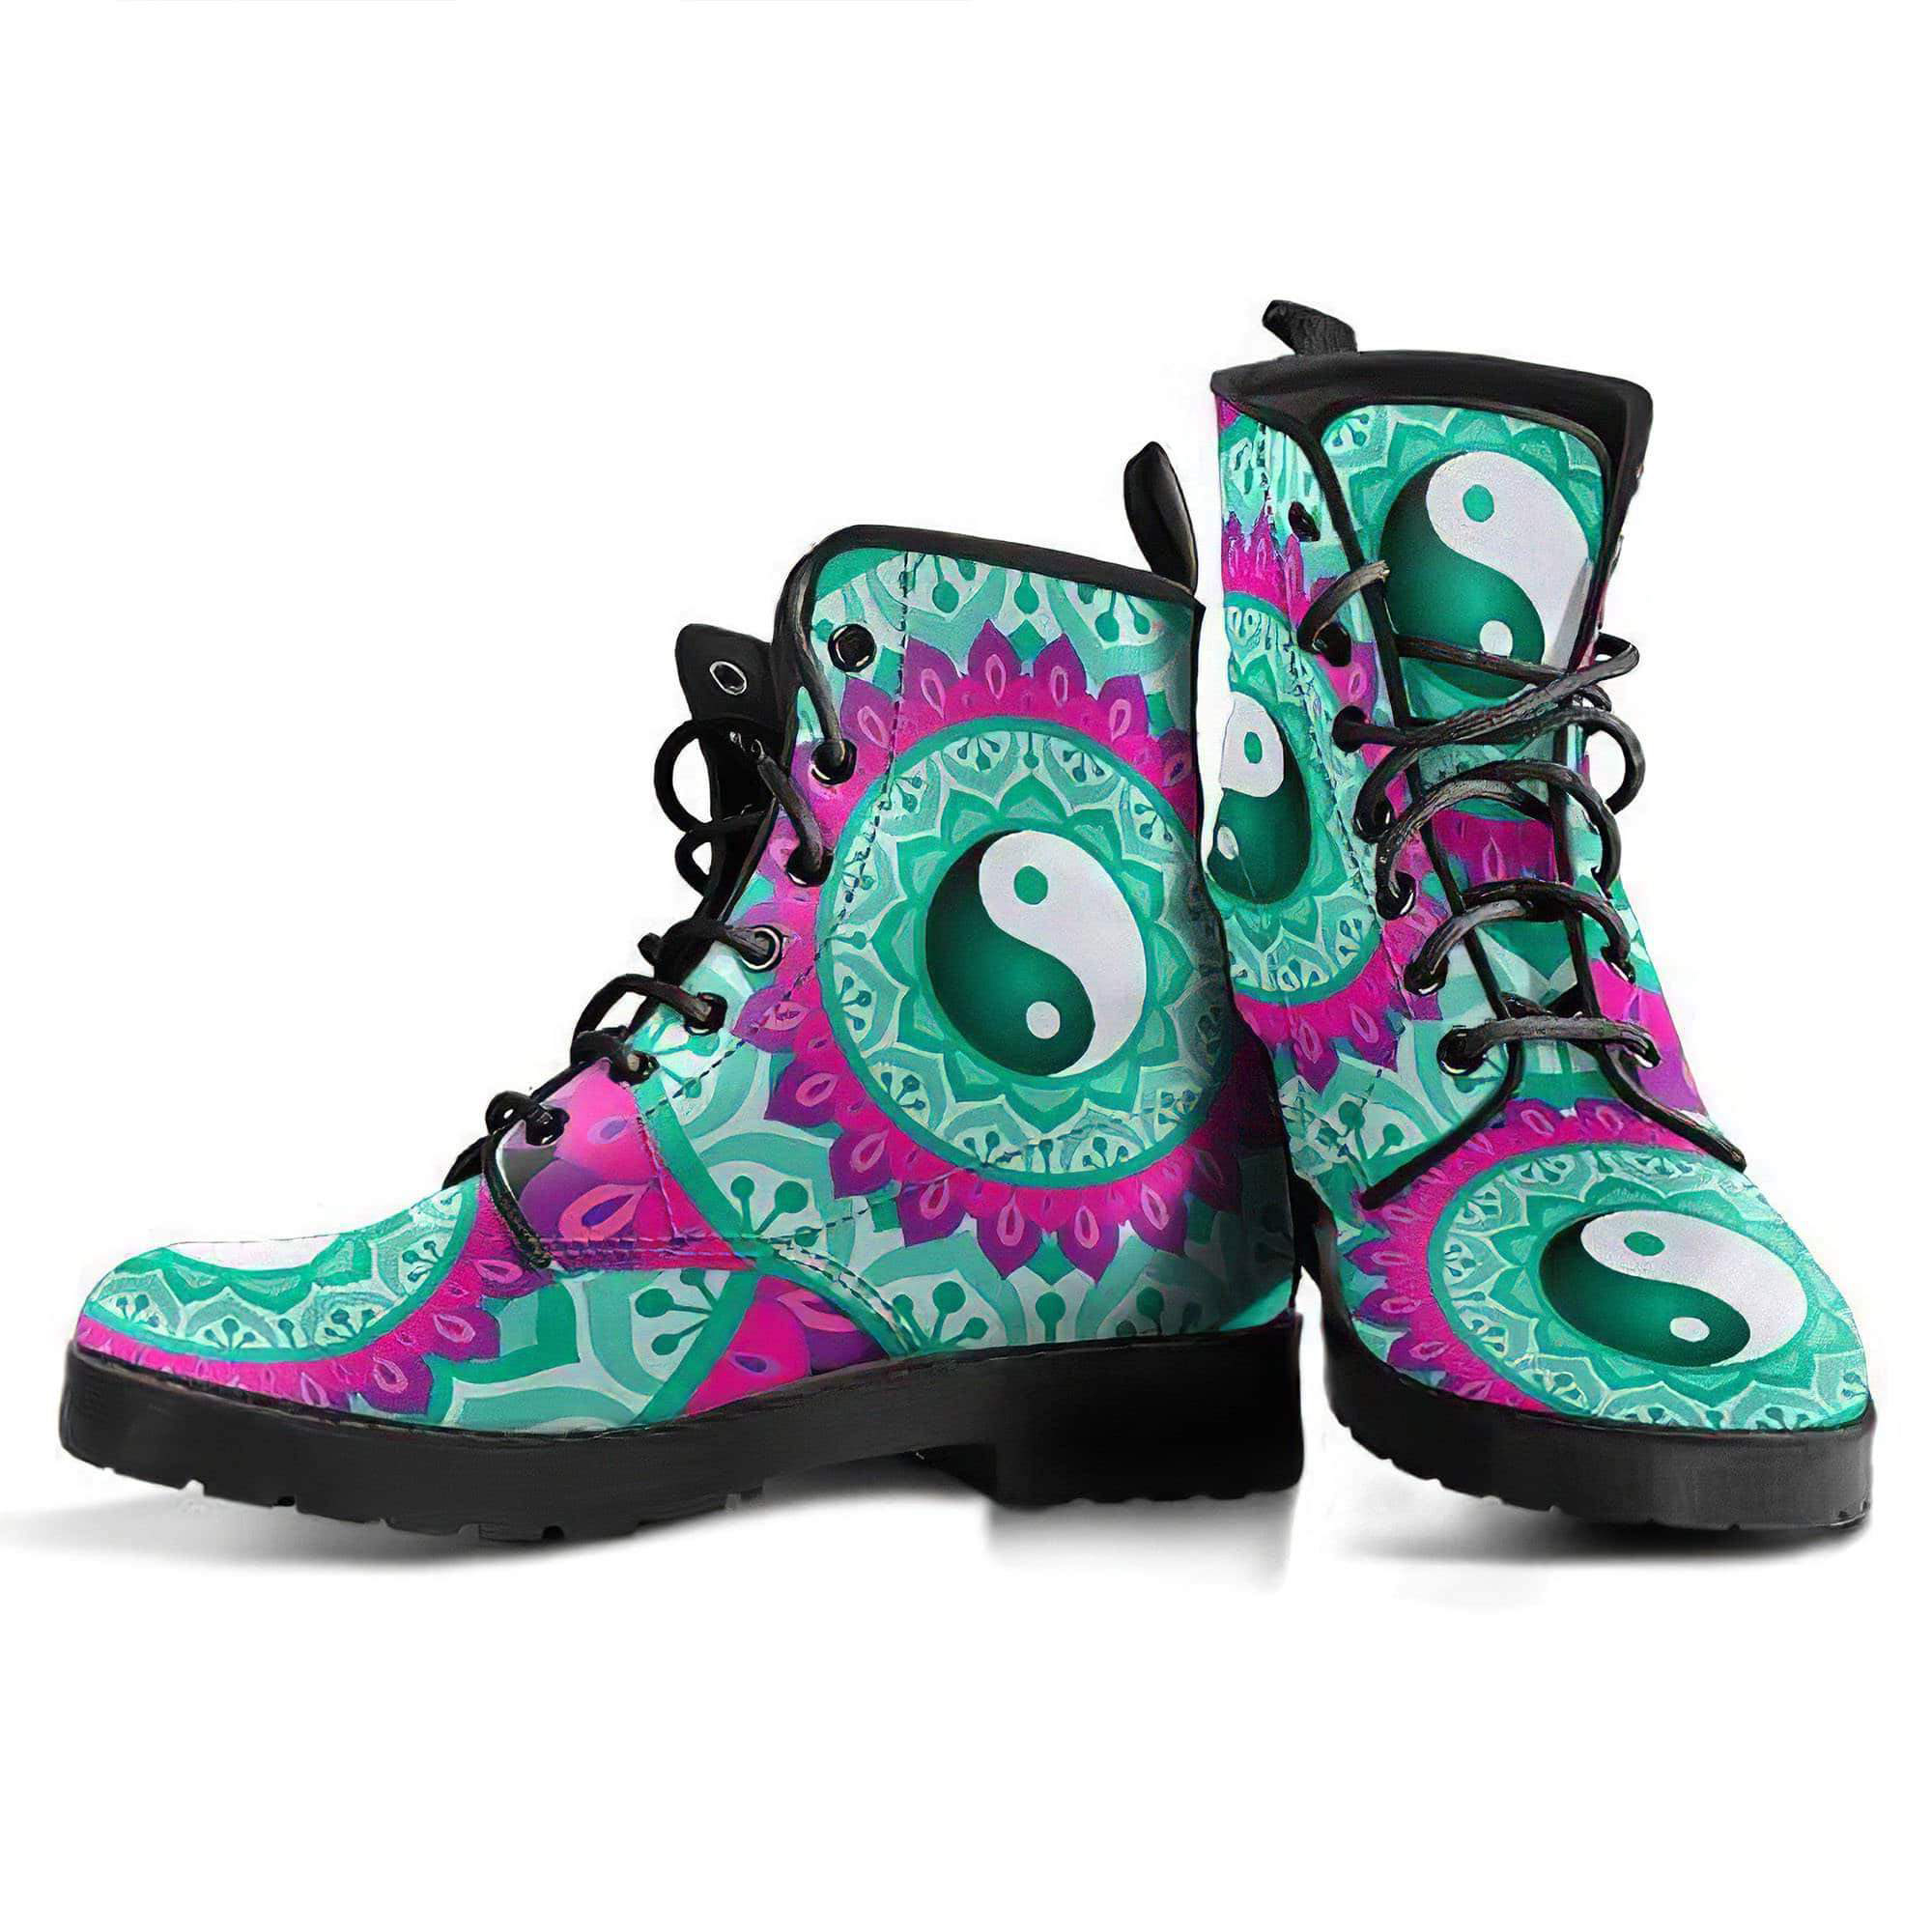 yinyang-mandala-1-handcrafted-boots-women-s-leather-boots-12051981926461.jpg